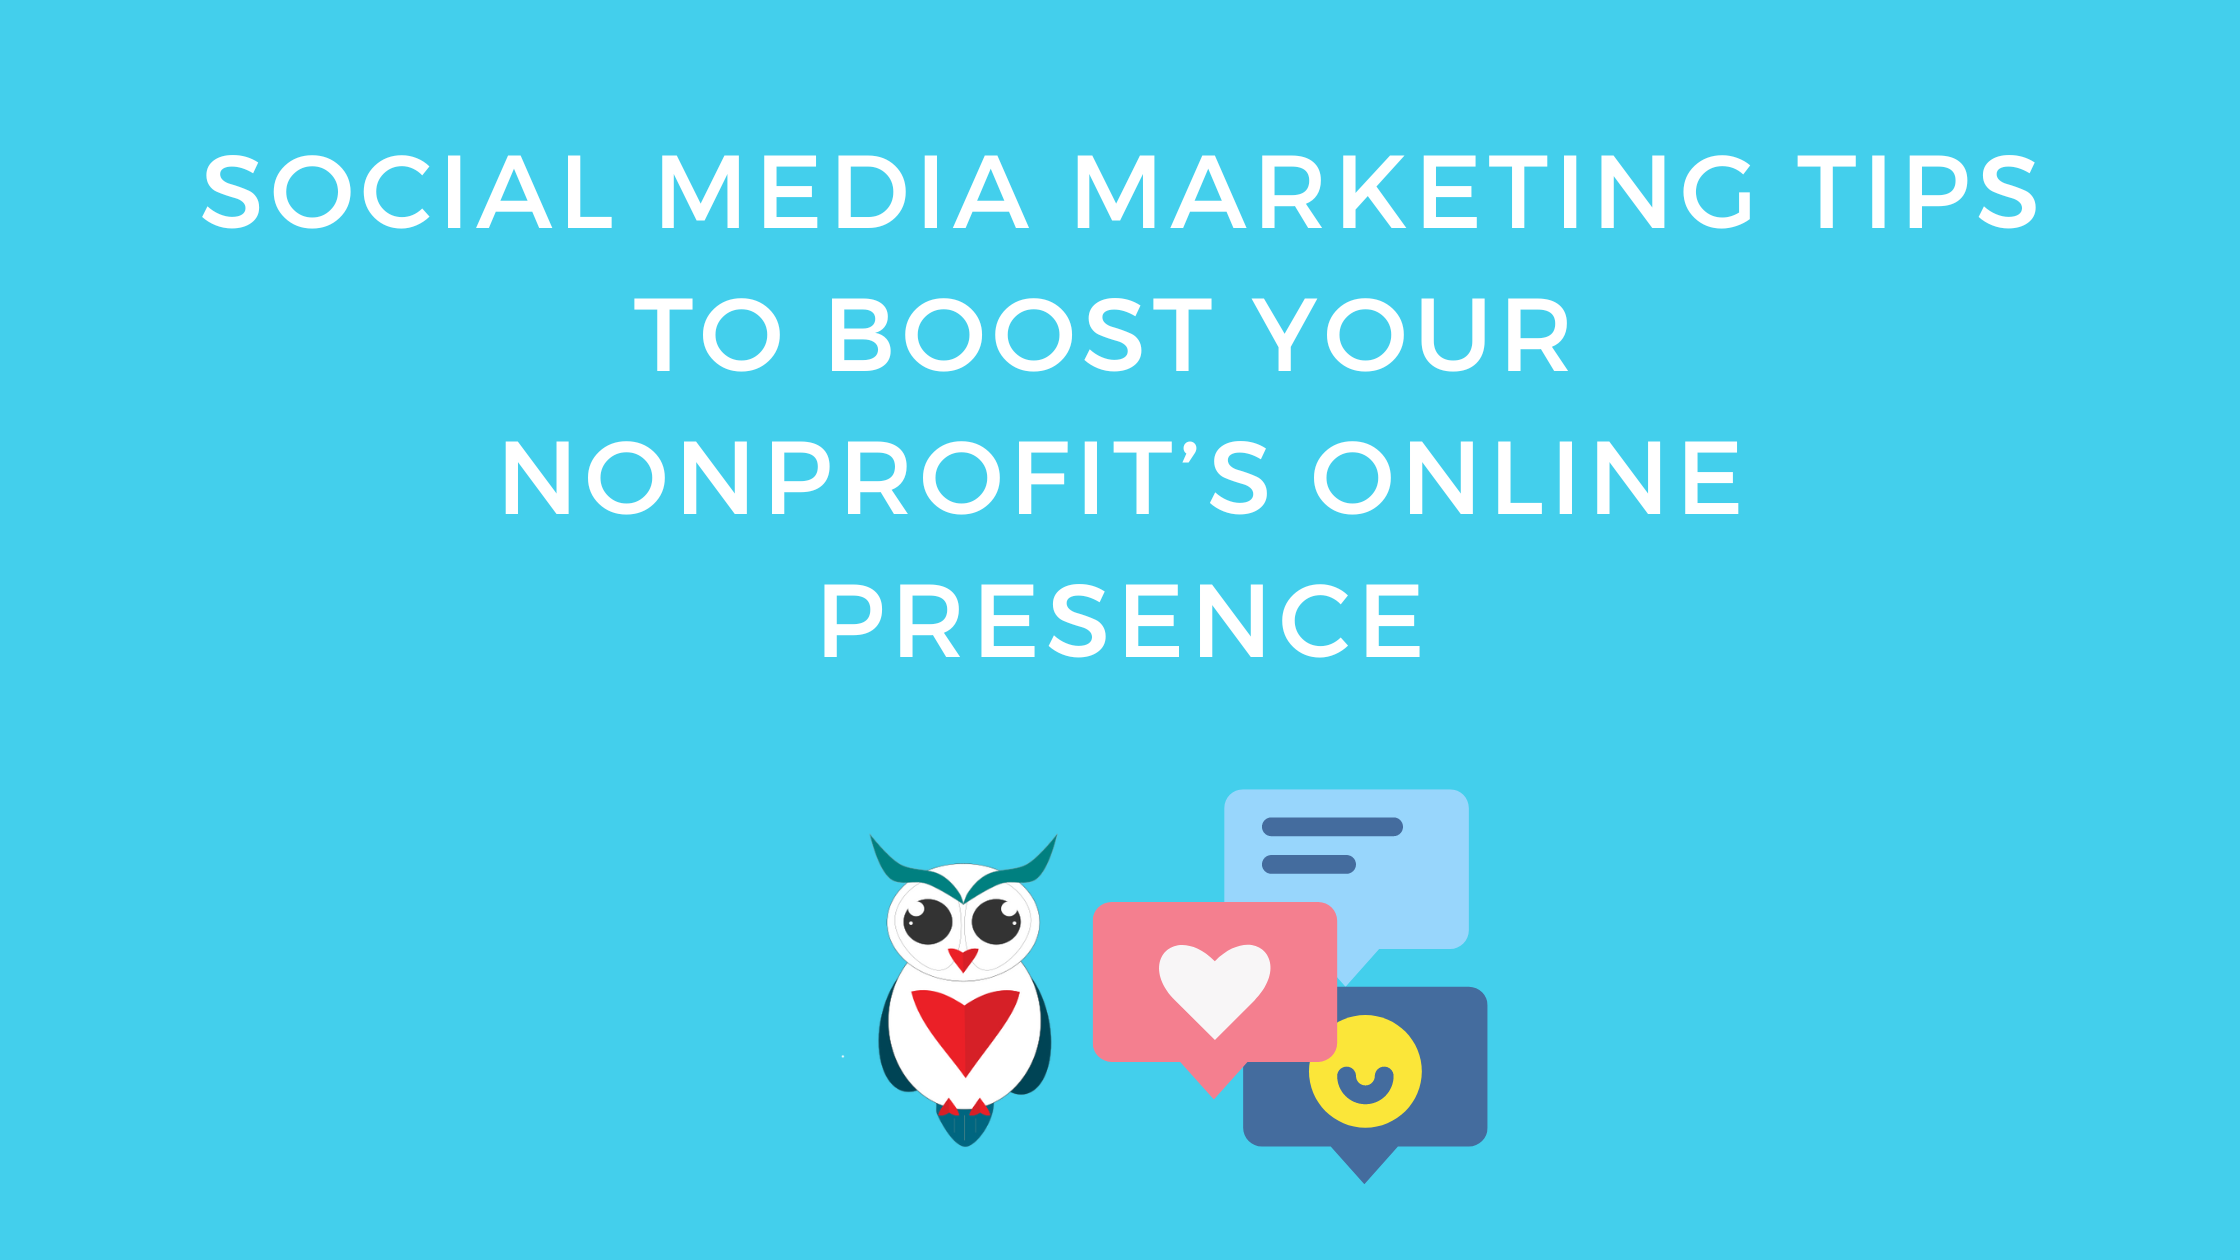 Social Media Marketing Tips to Boost Your Nonprofit’s Online Presence